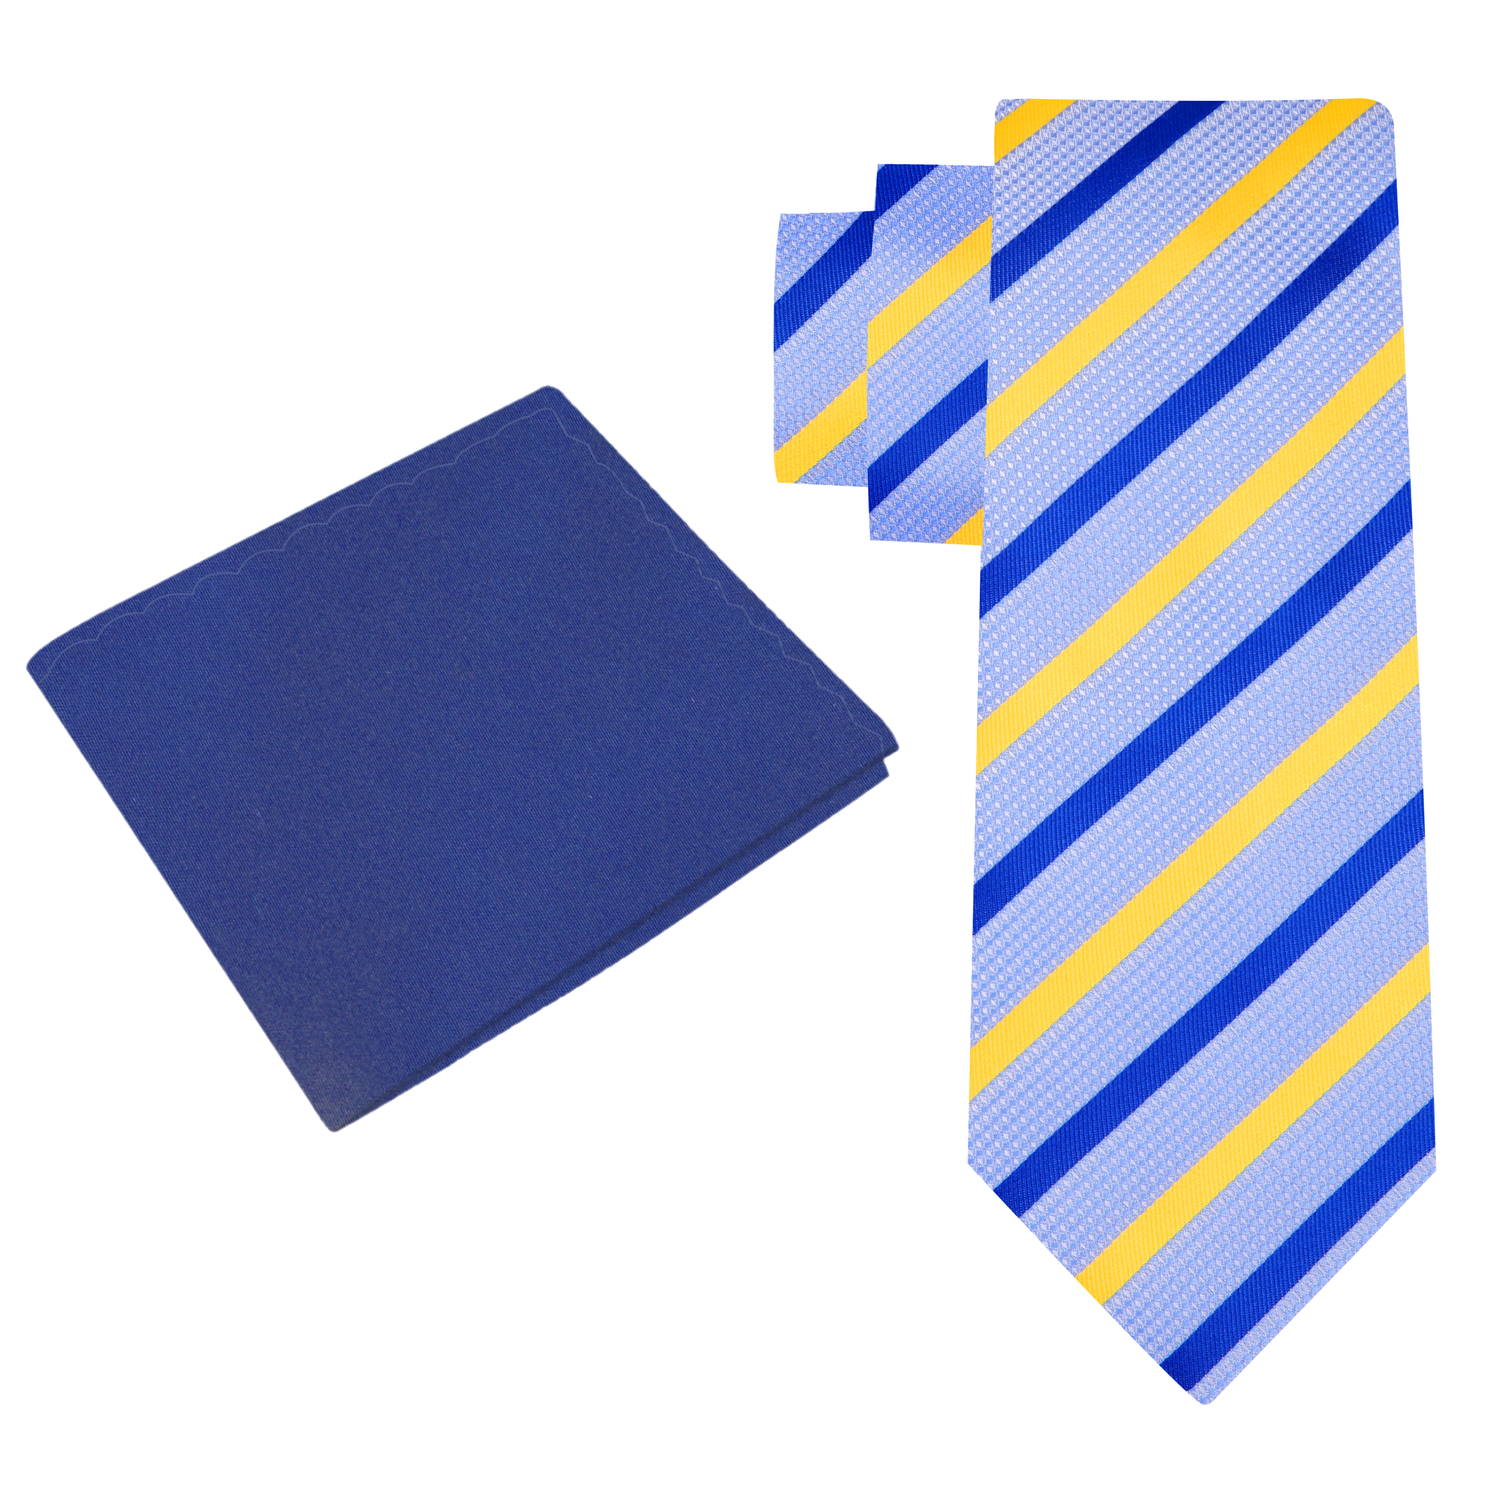 View 2: Light Blue, Blue, Yellow Stripe Tie and Blue Square